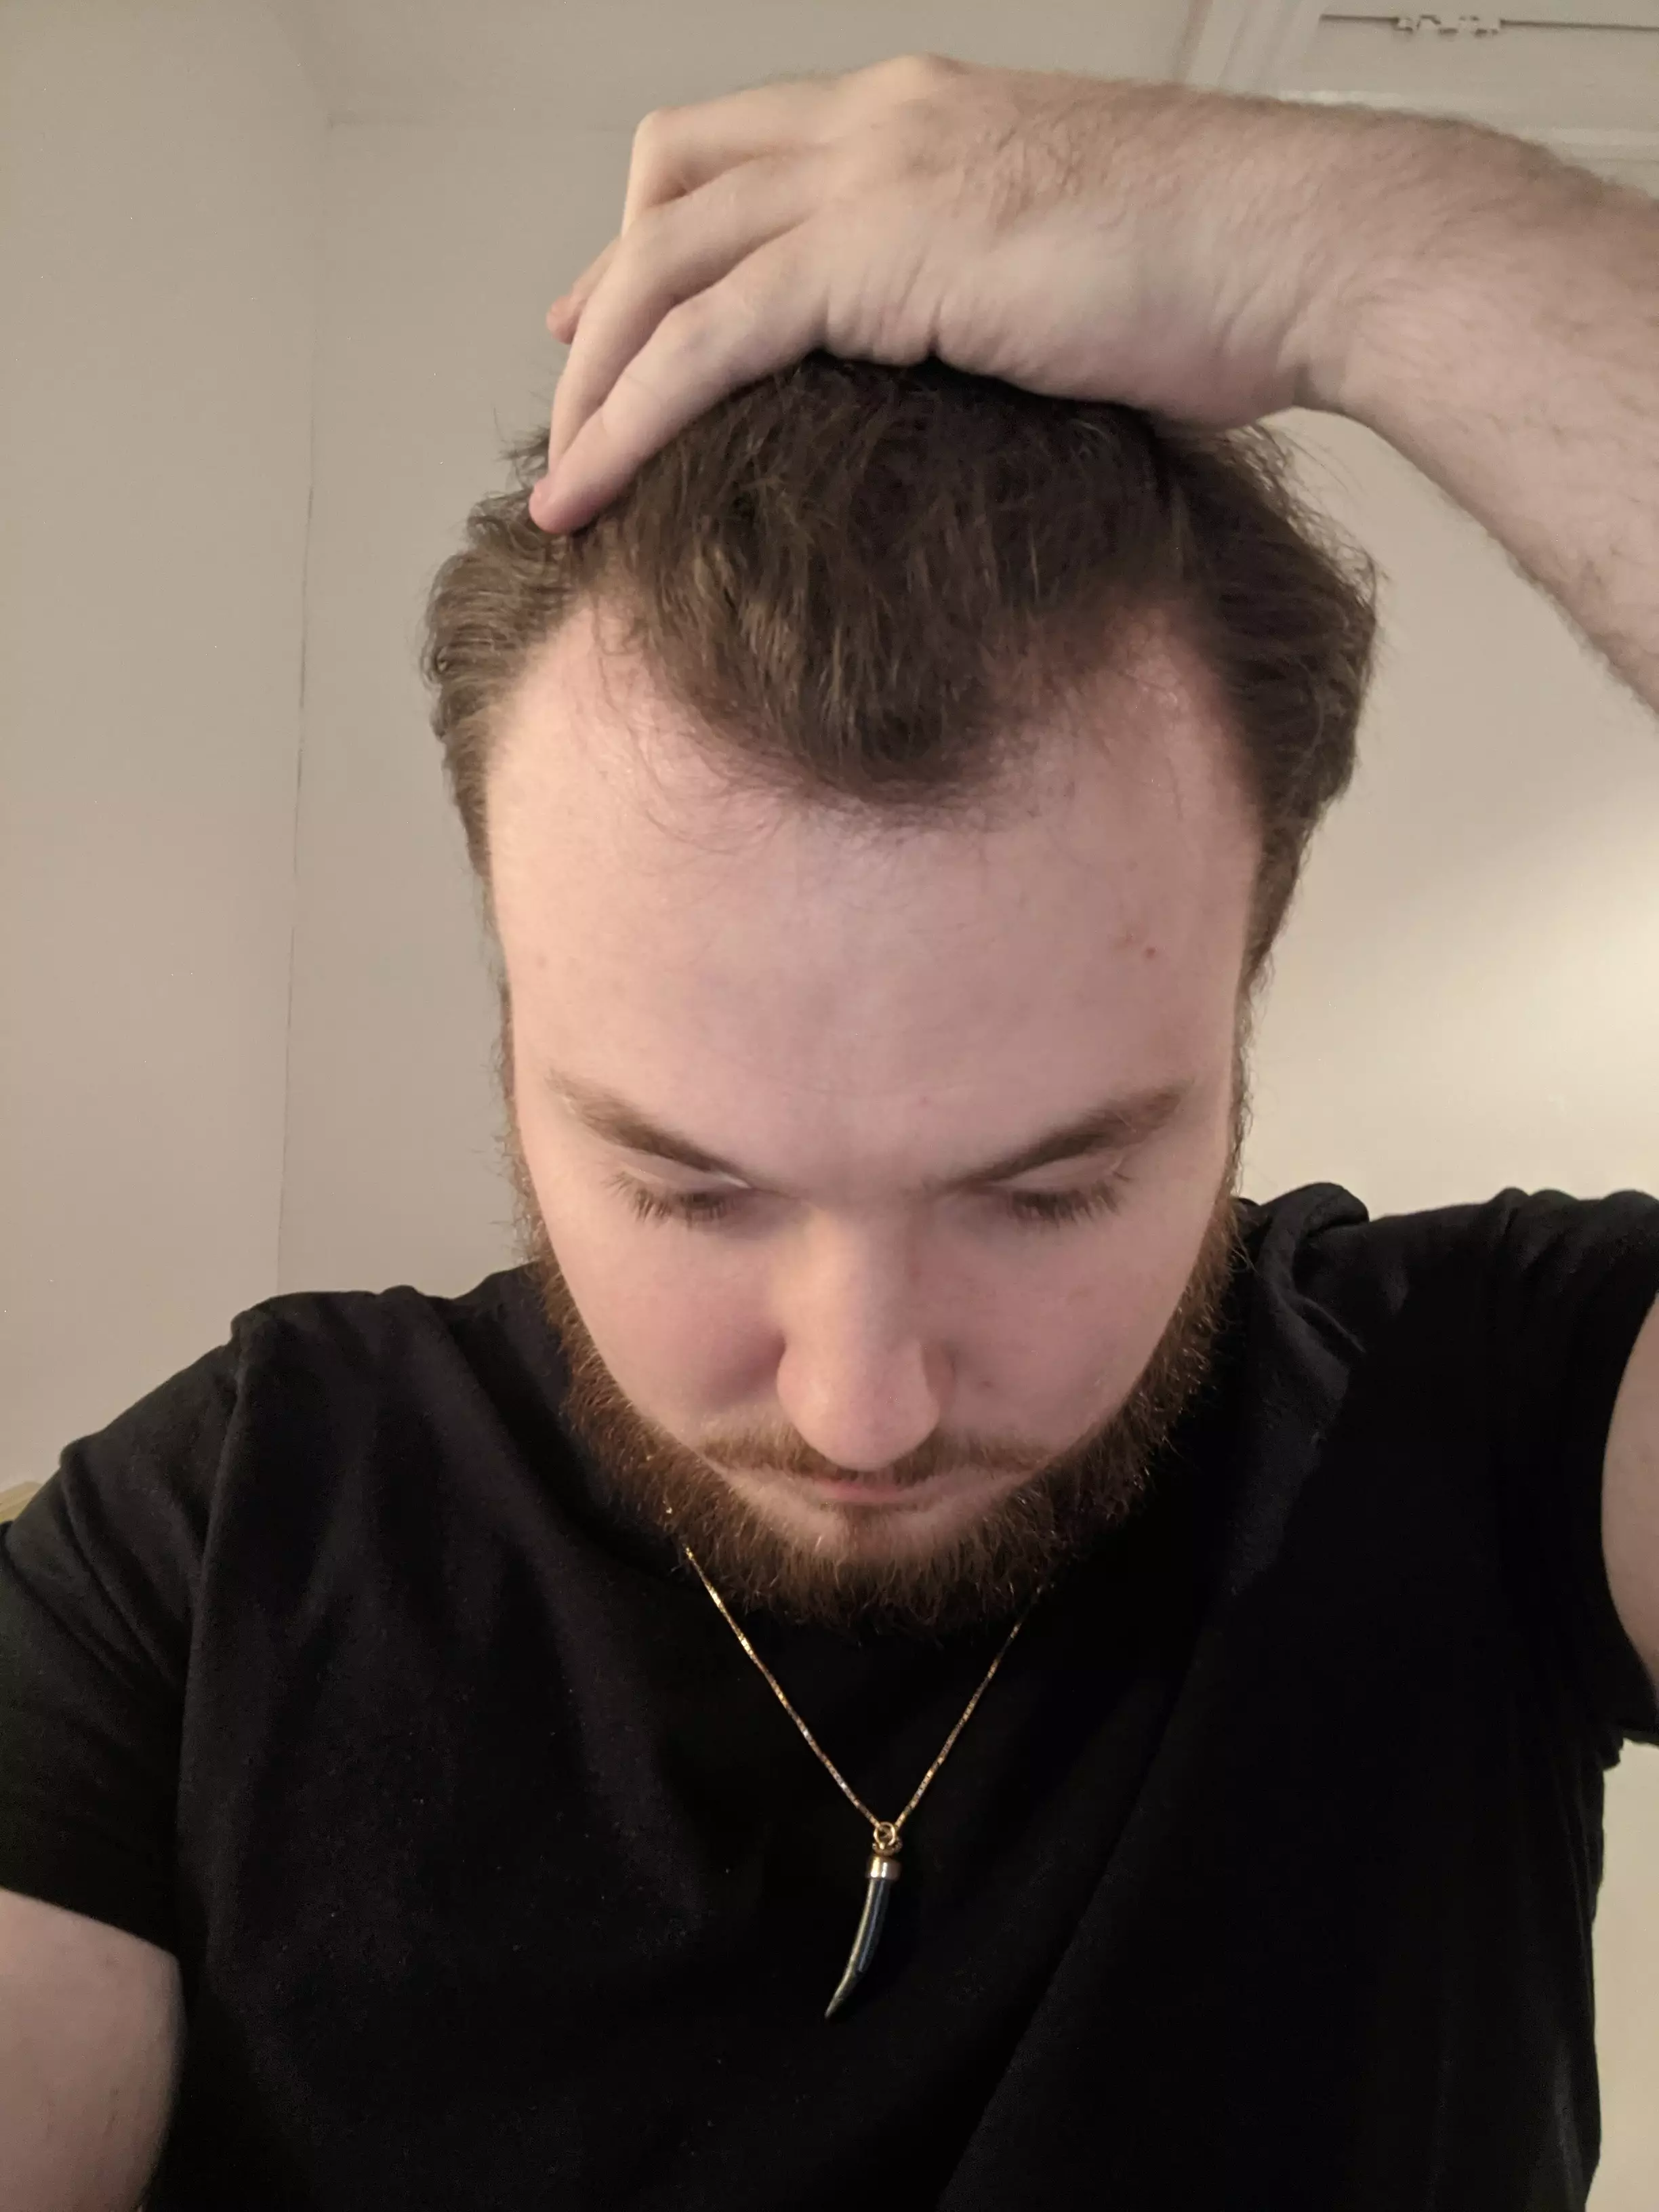 Myles is hoping to get a hair transplant.